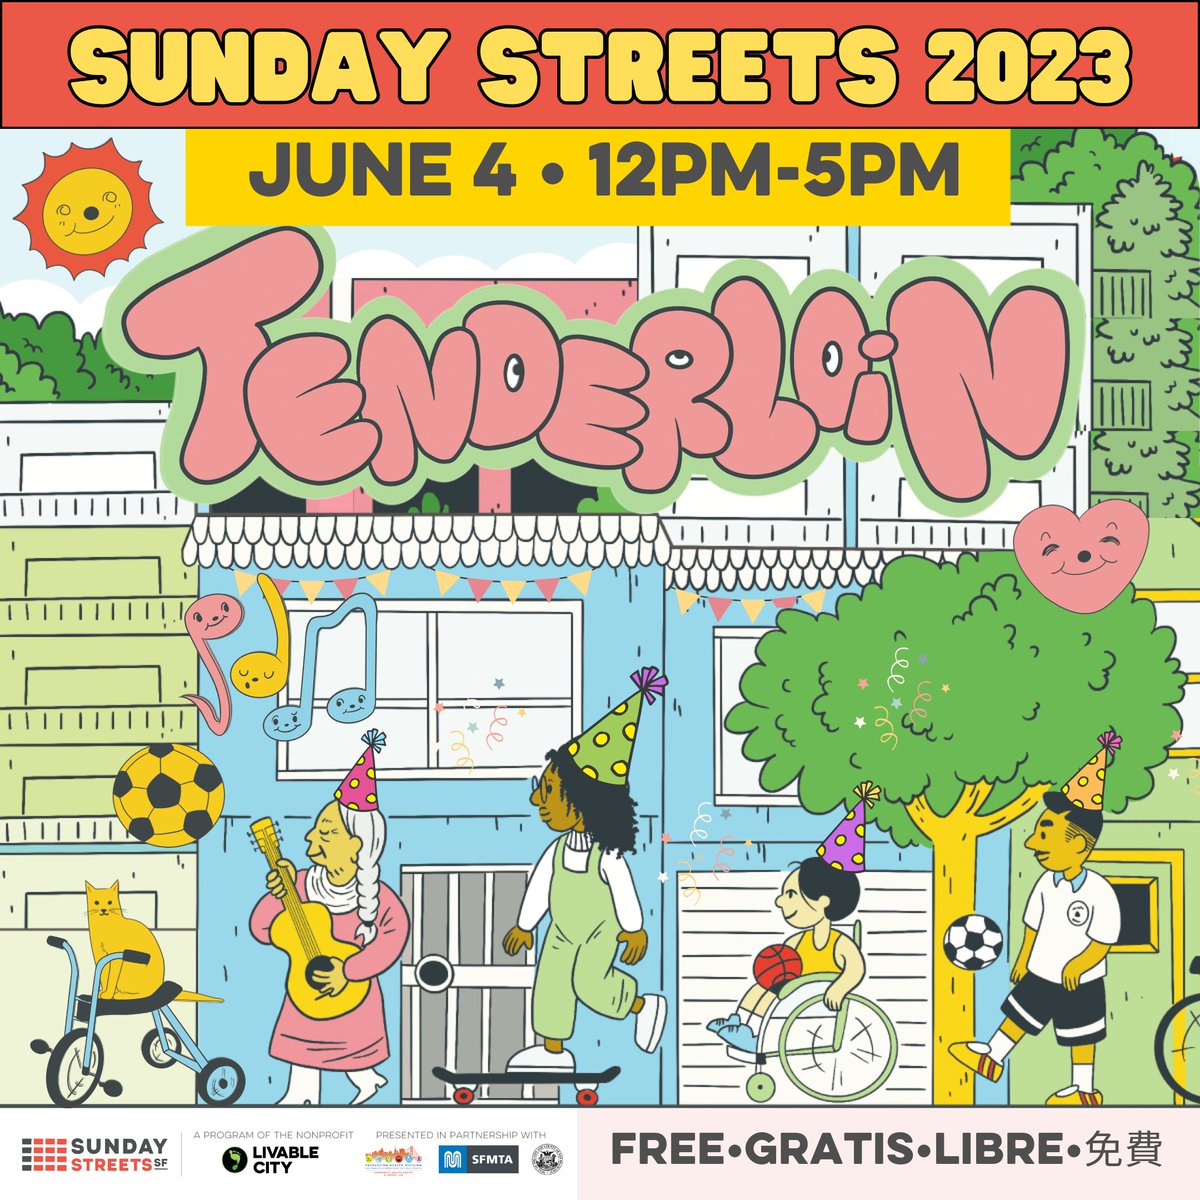 Countdown to this Sunday! Join us for an exciting day as Sunday Streets will open up the streets of Tenderloin for an afternoon of fun for the whole family. 📆 Sunday, June 4th 🕚 12PM - 5PM 📍 Golden Gate Ave btw Hyde & Jones St 🔗 SundayStreetsSF.com/Tenderloin